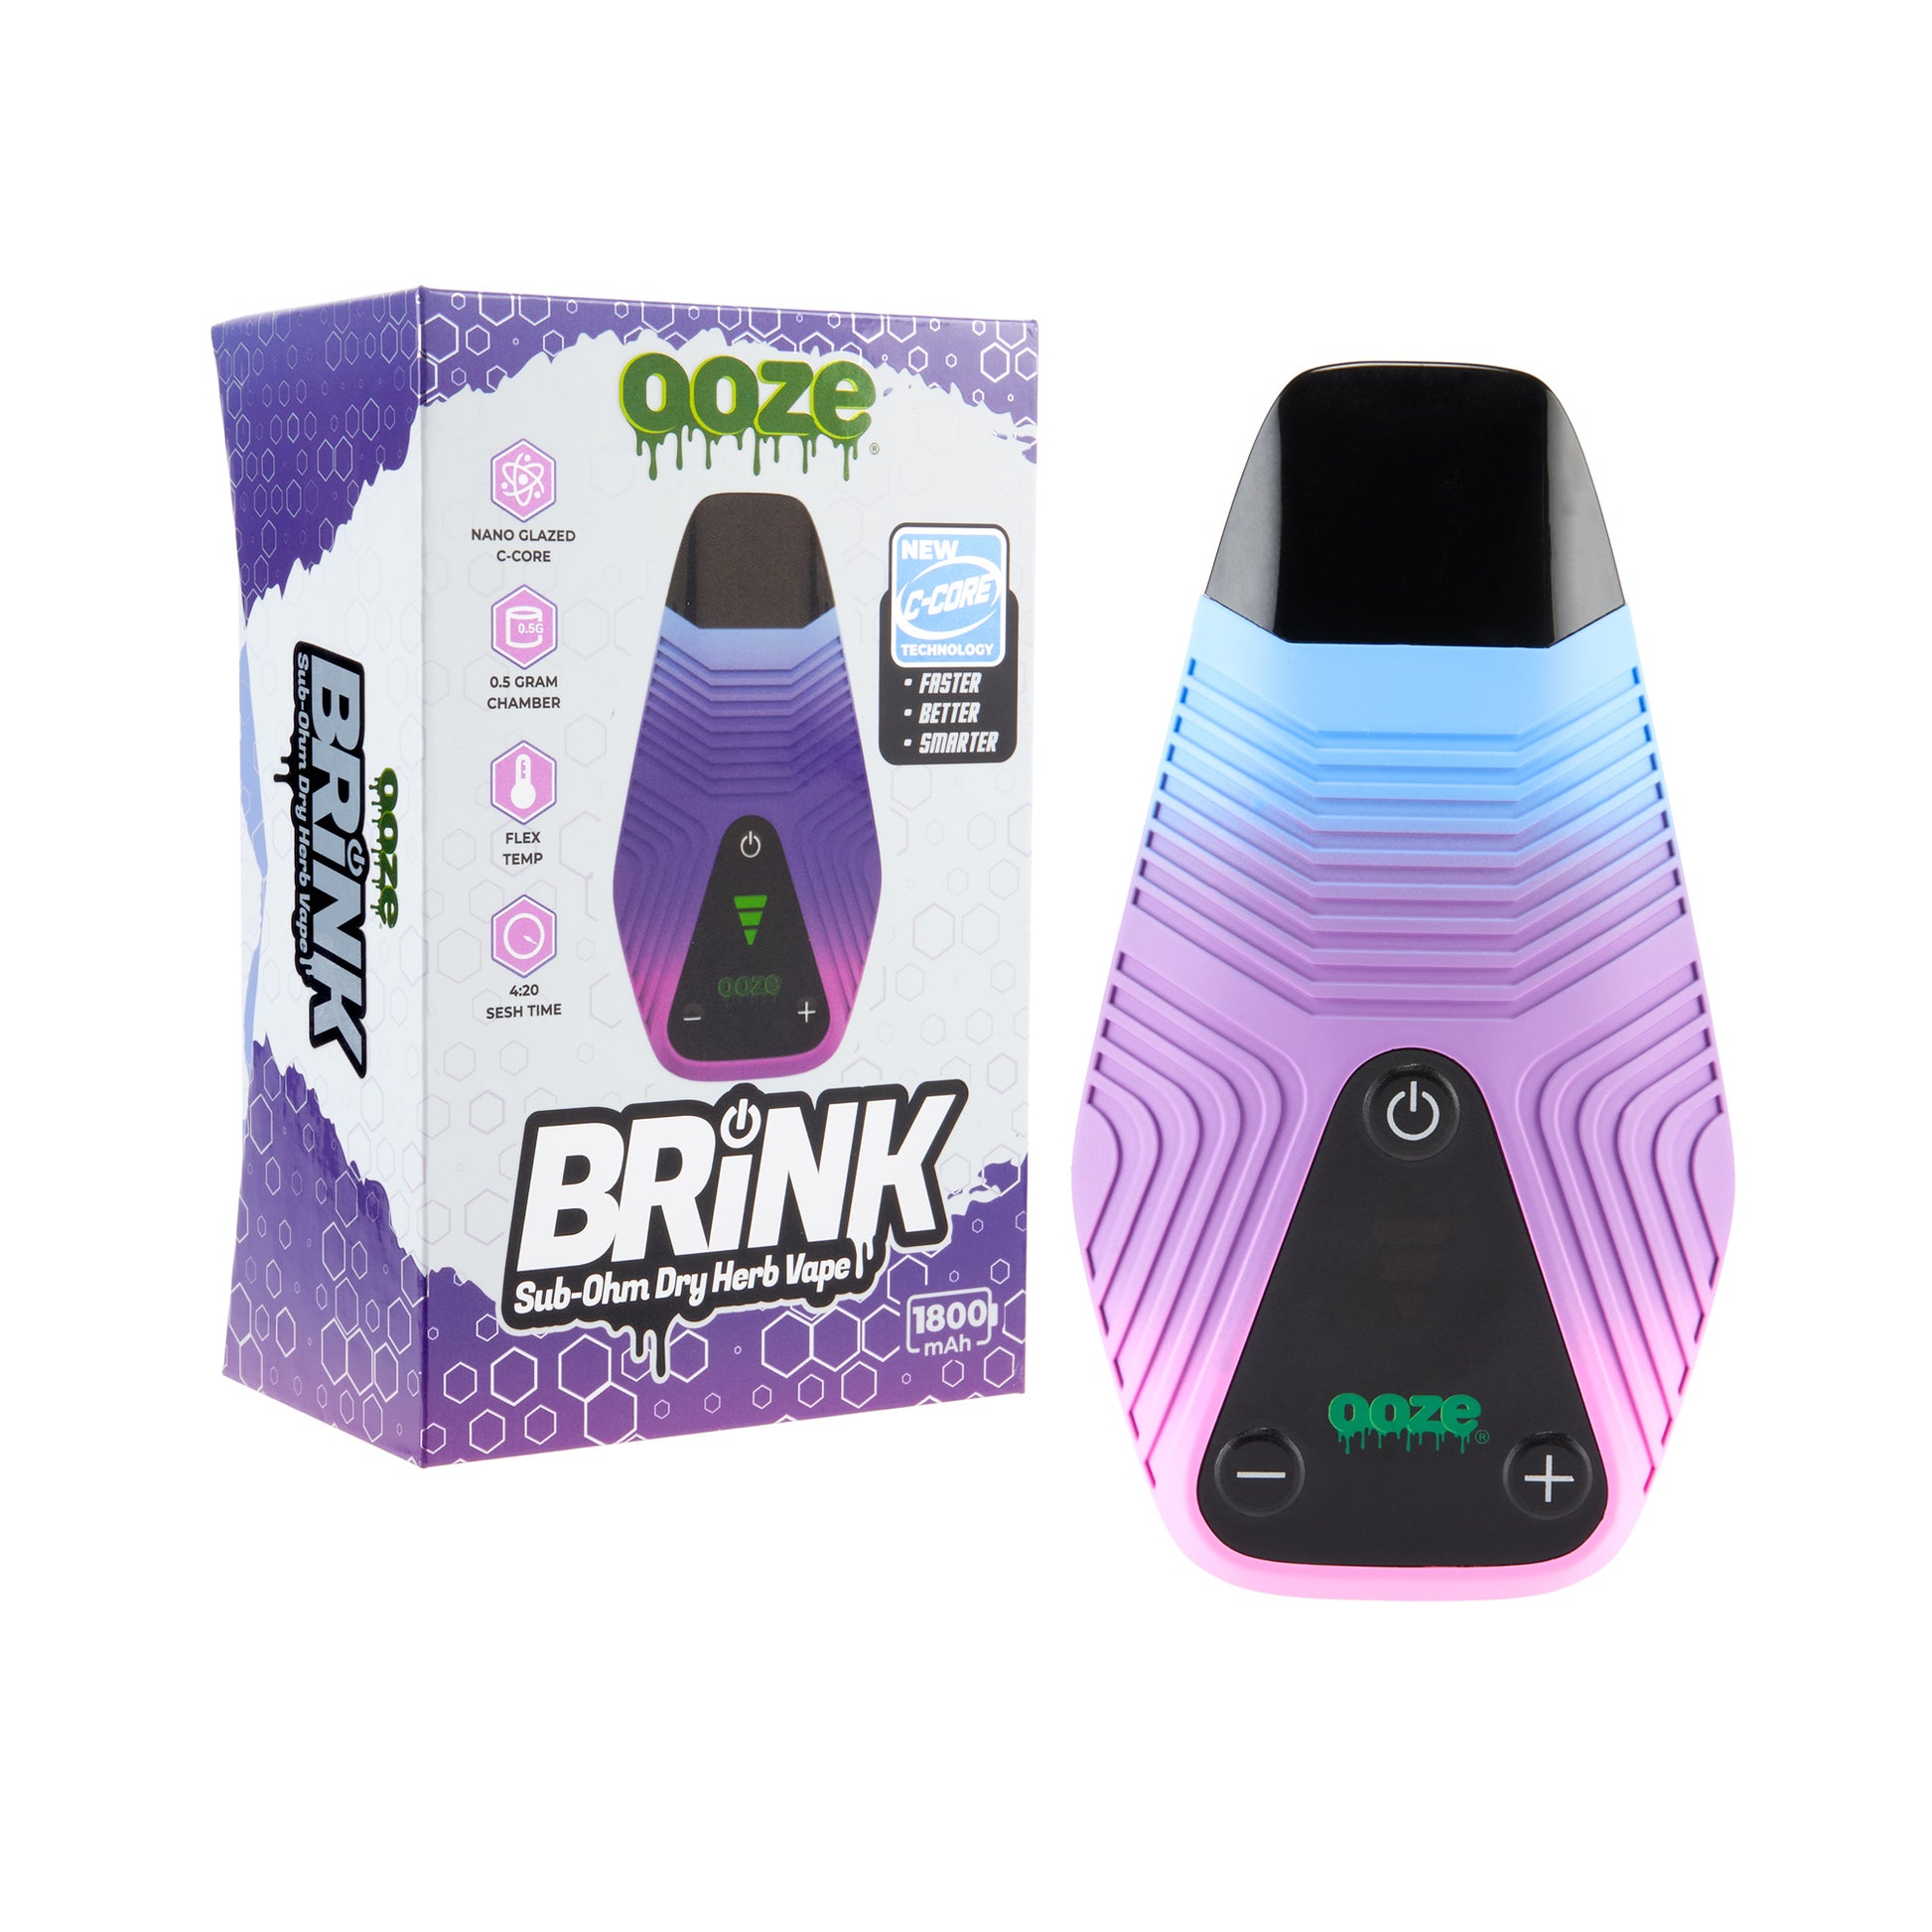 The twilight Ooze Brink dry herb vape is shown next to the box